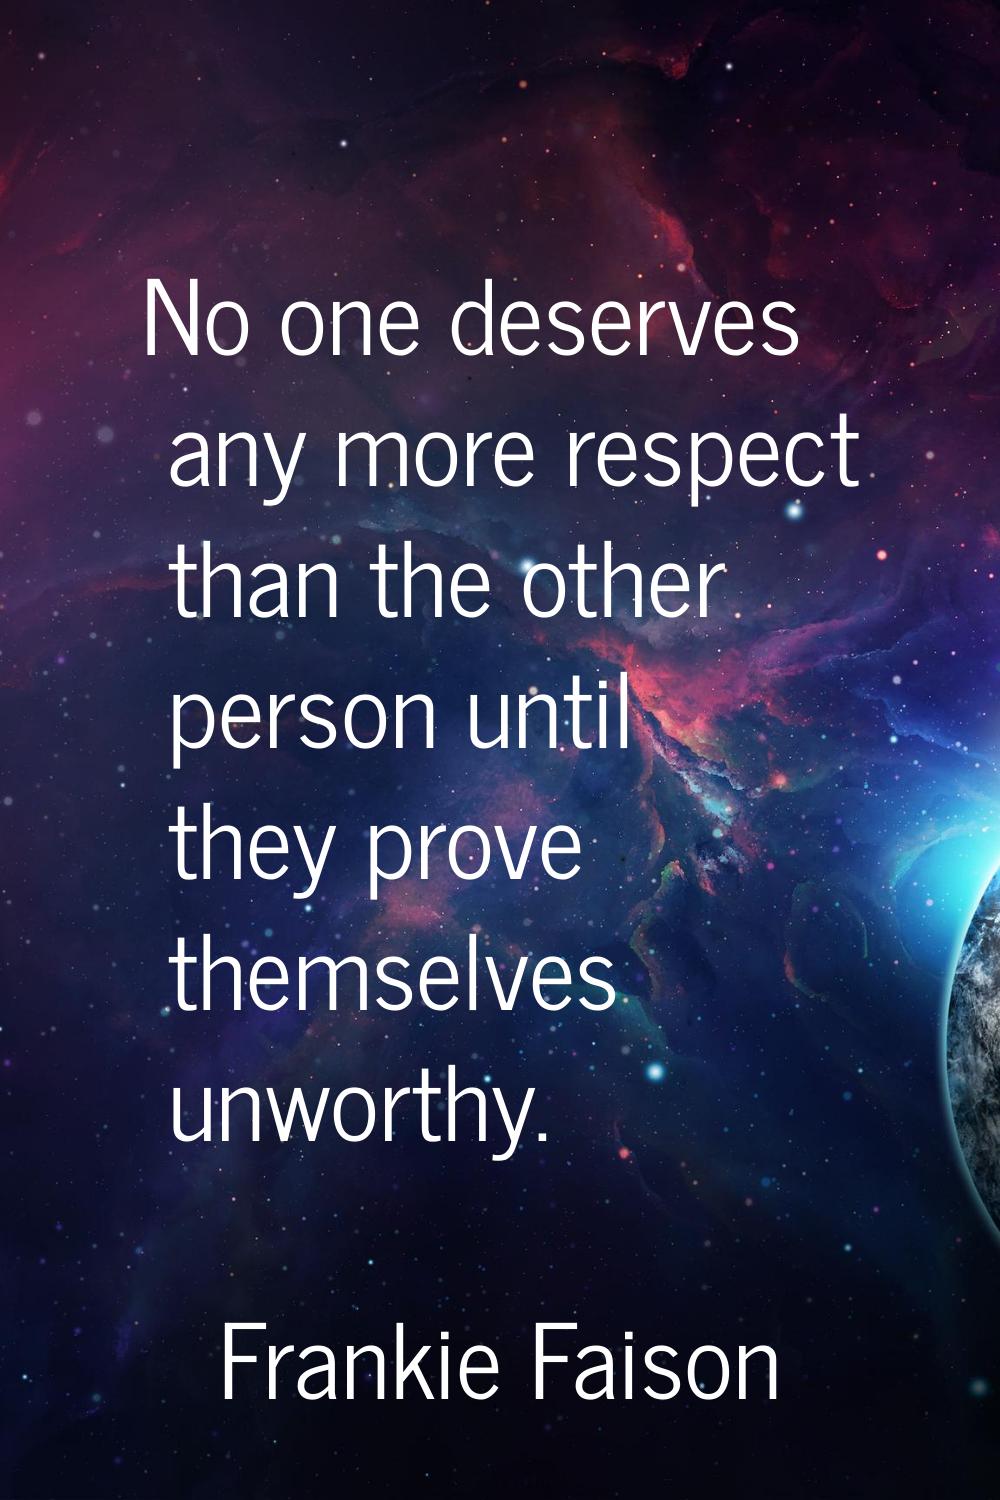 No one deserves any more respect than the other person until they prove themselves unworthy.